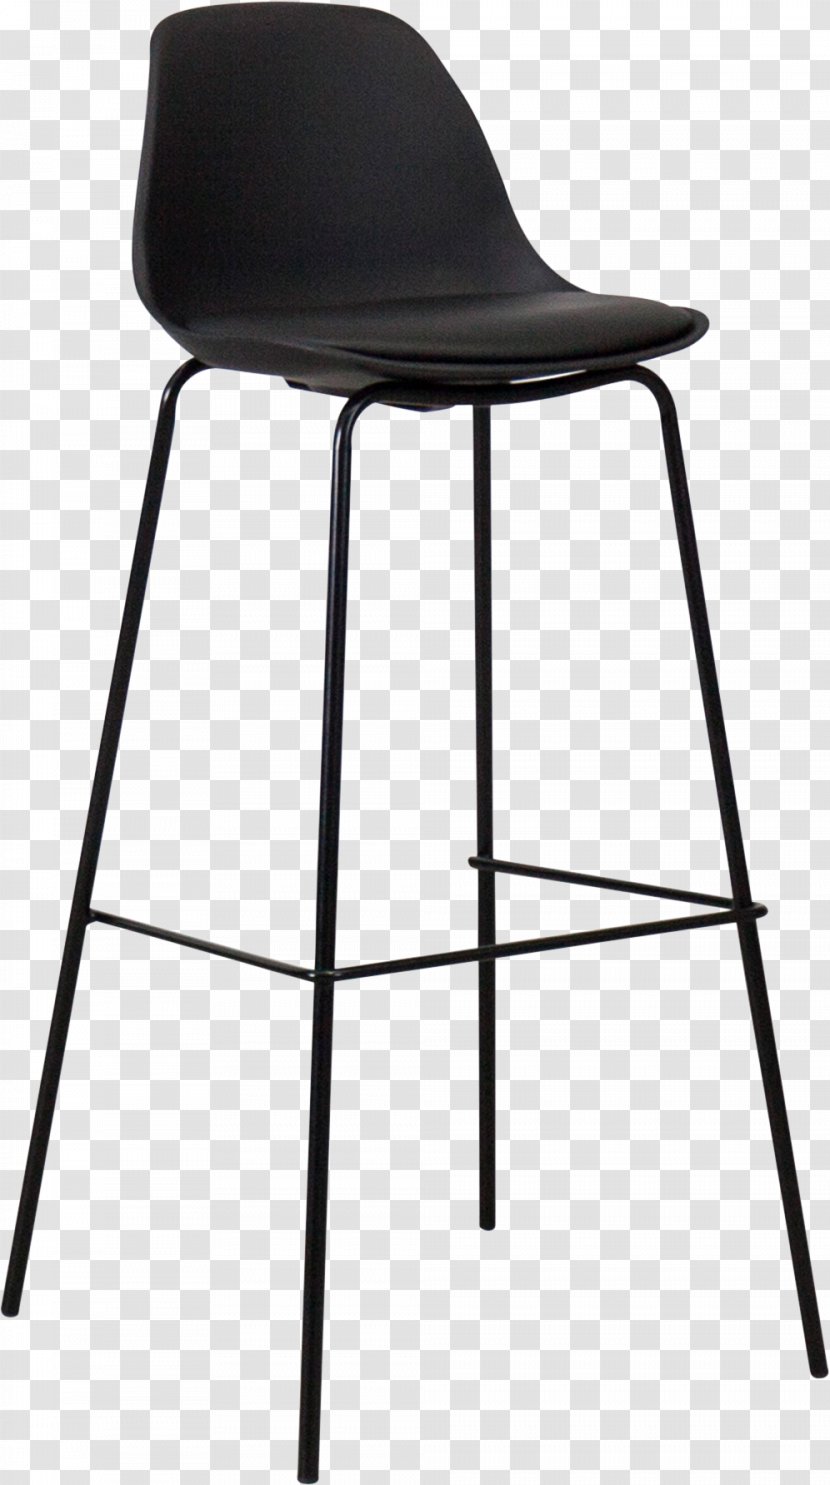 Bar Stool Table Chair - Kitchen Transparent PNG